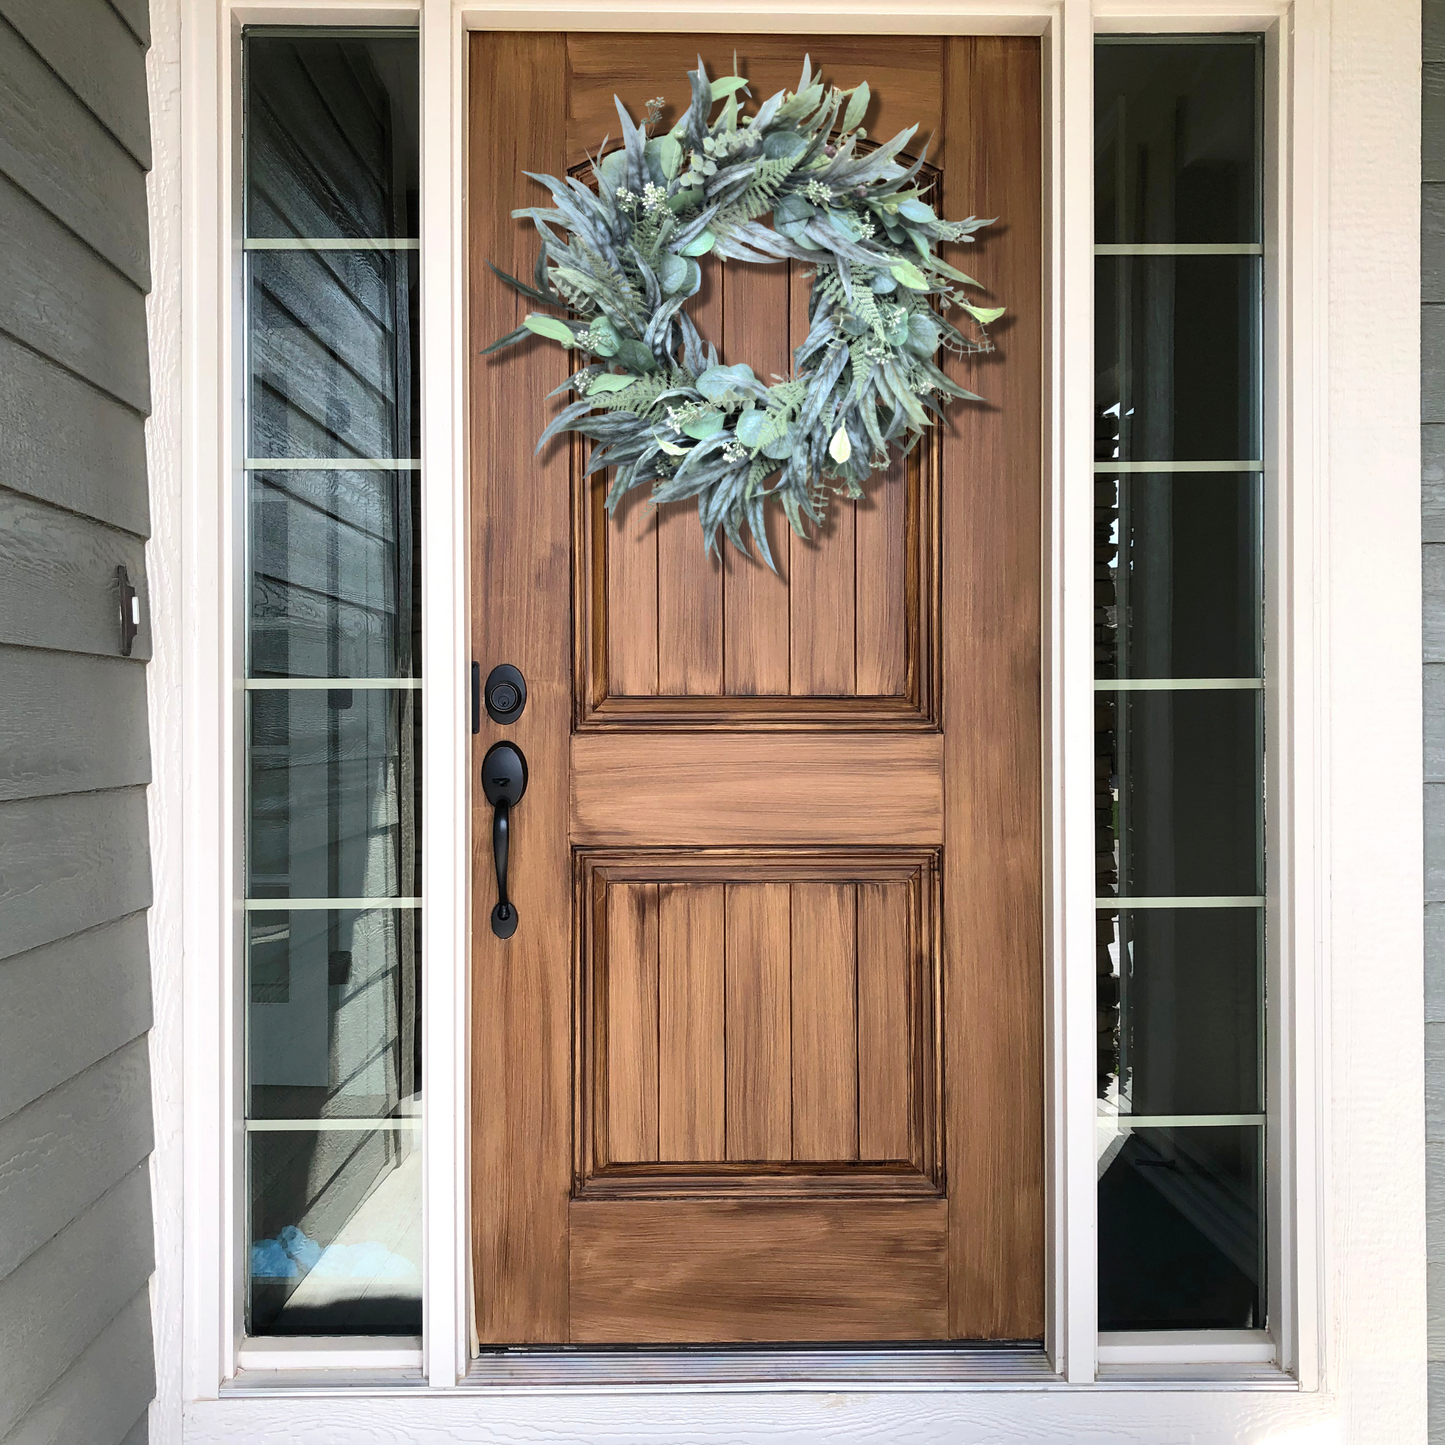 Year-Round Farmhouse Style Faux Greenery Wreath – Timeless Elegance for Every Season